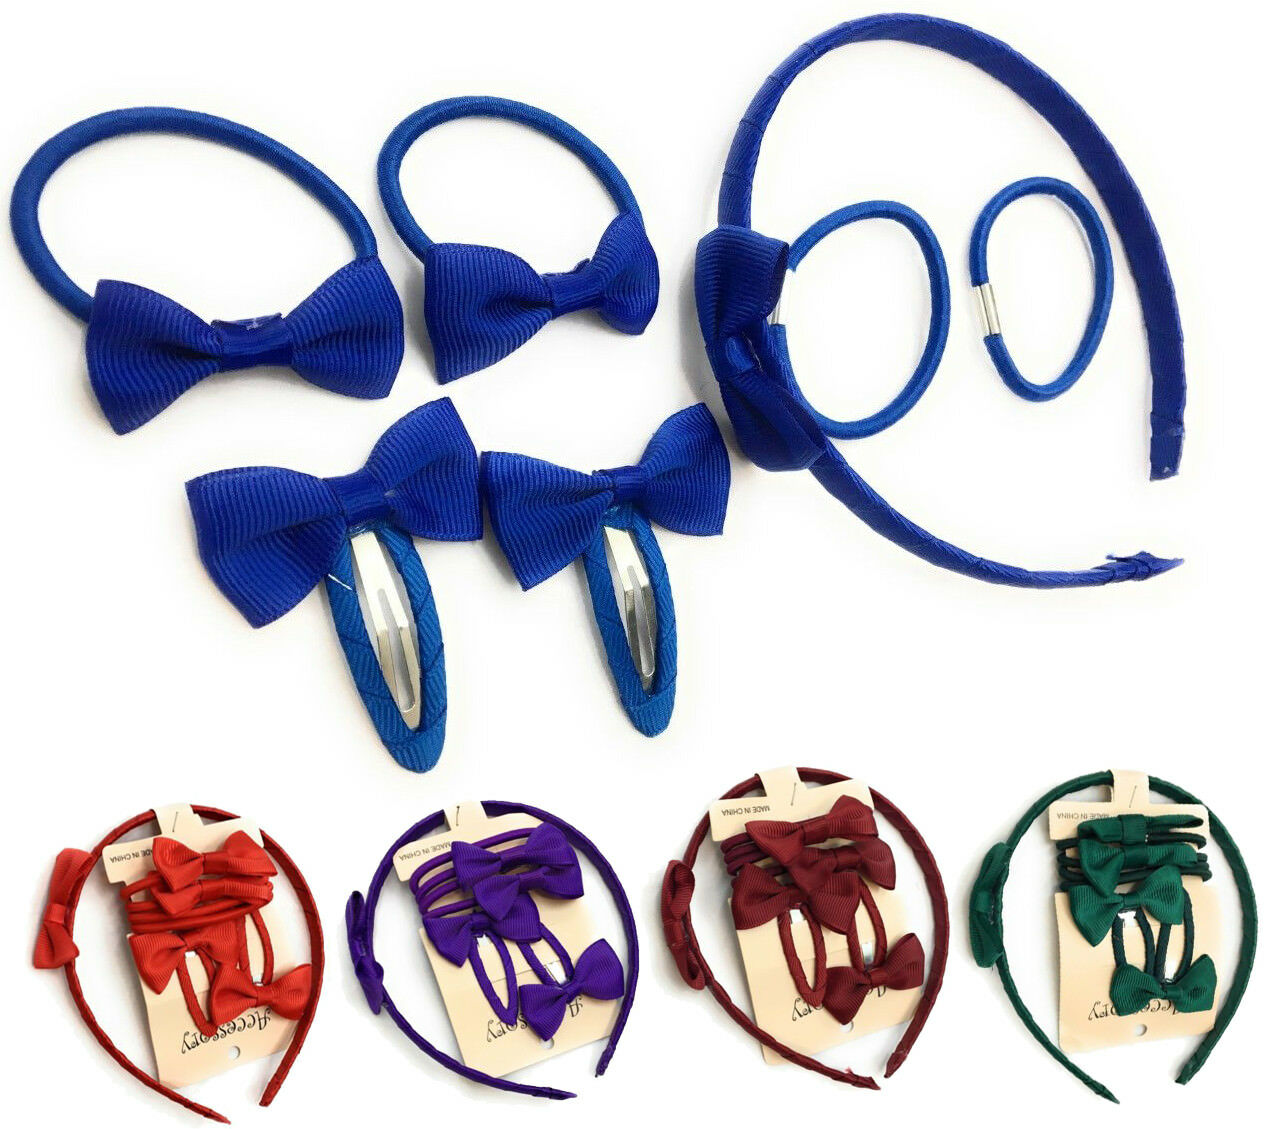 7 PIECE SCHOOL COLOURS Hair Bow Snap Clips SET ALICE BAND Headband PonyTail